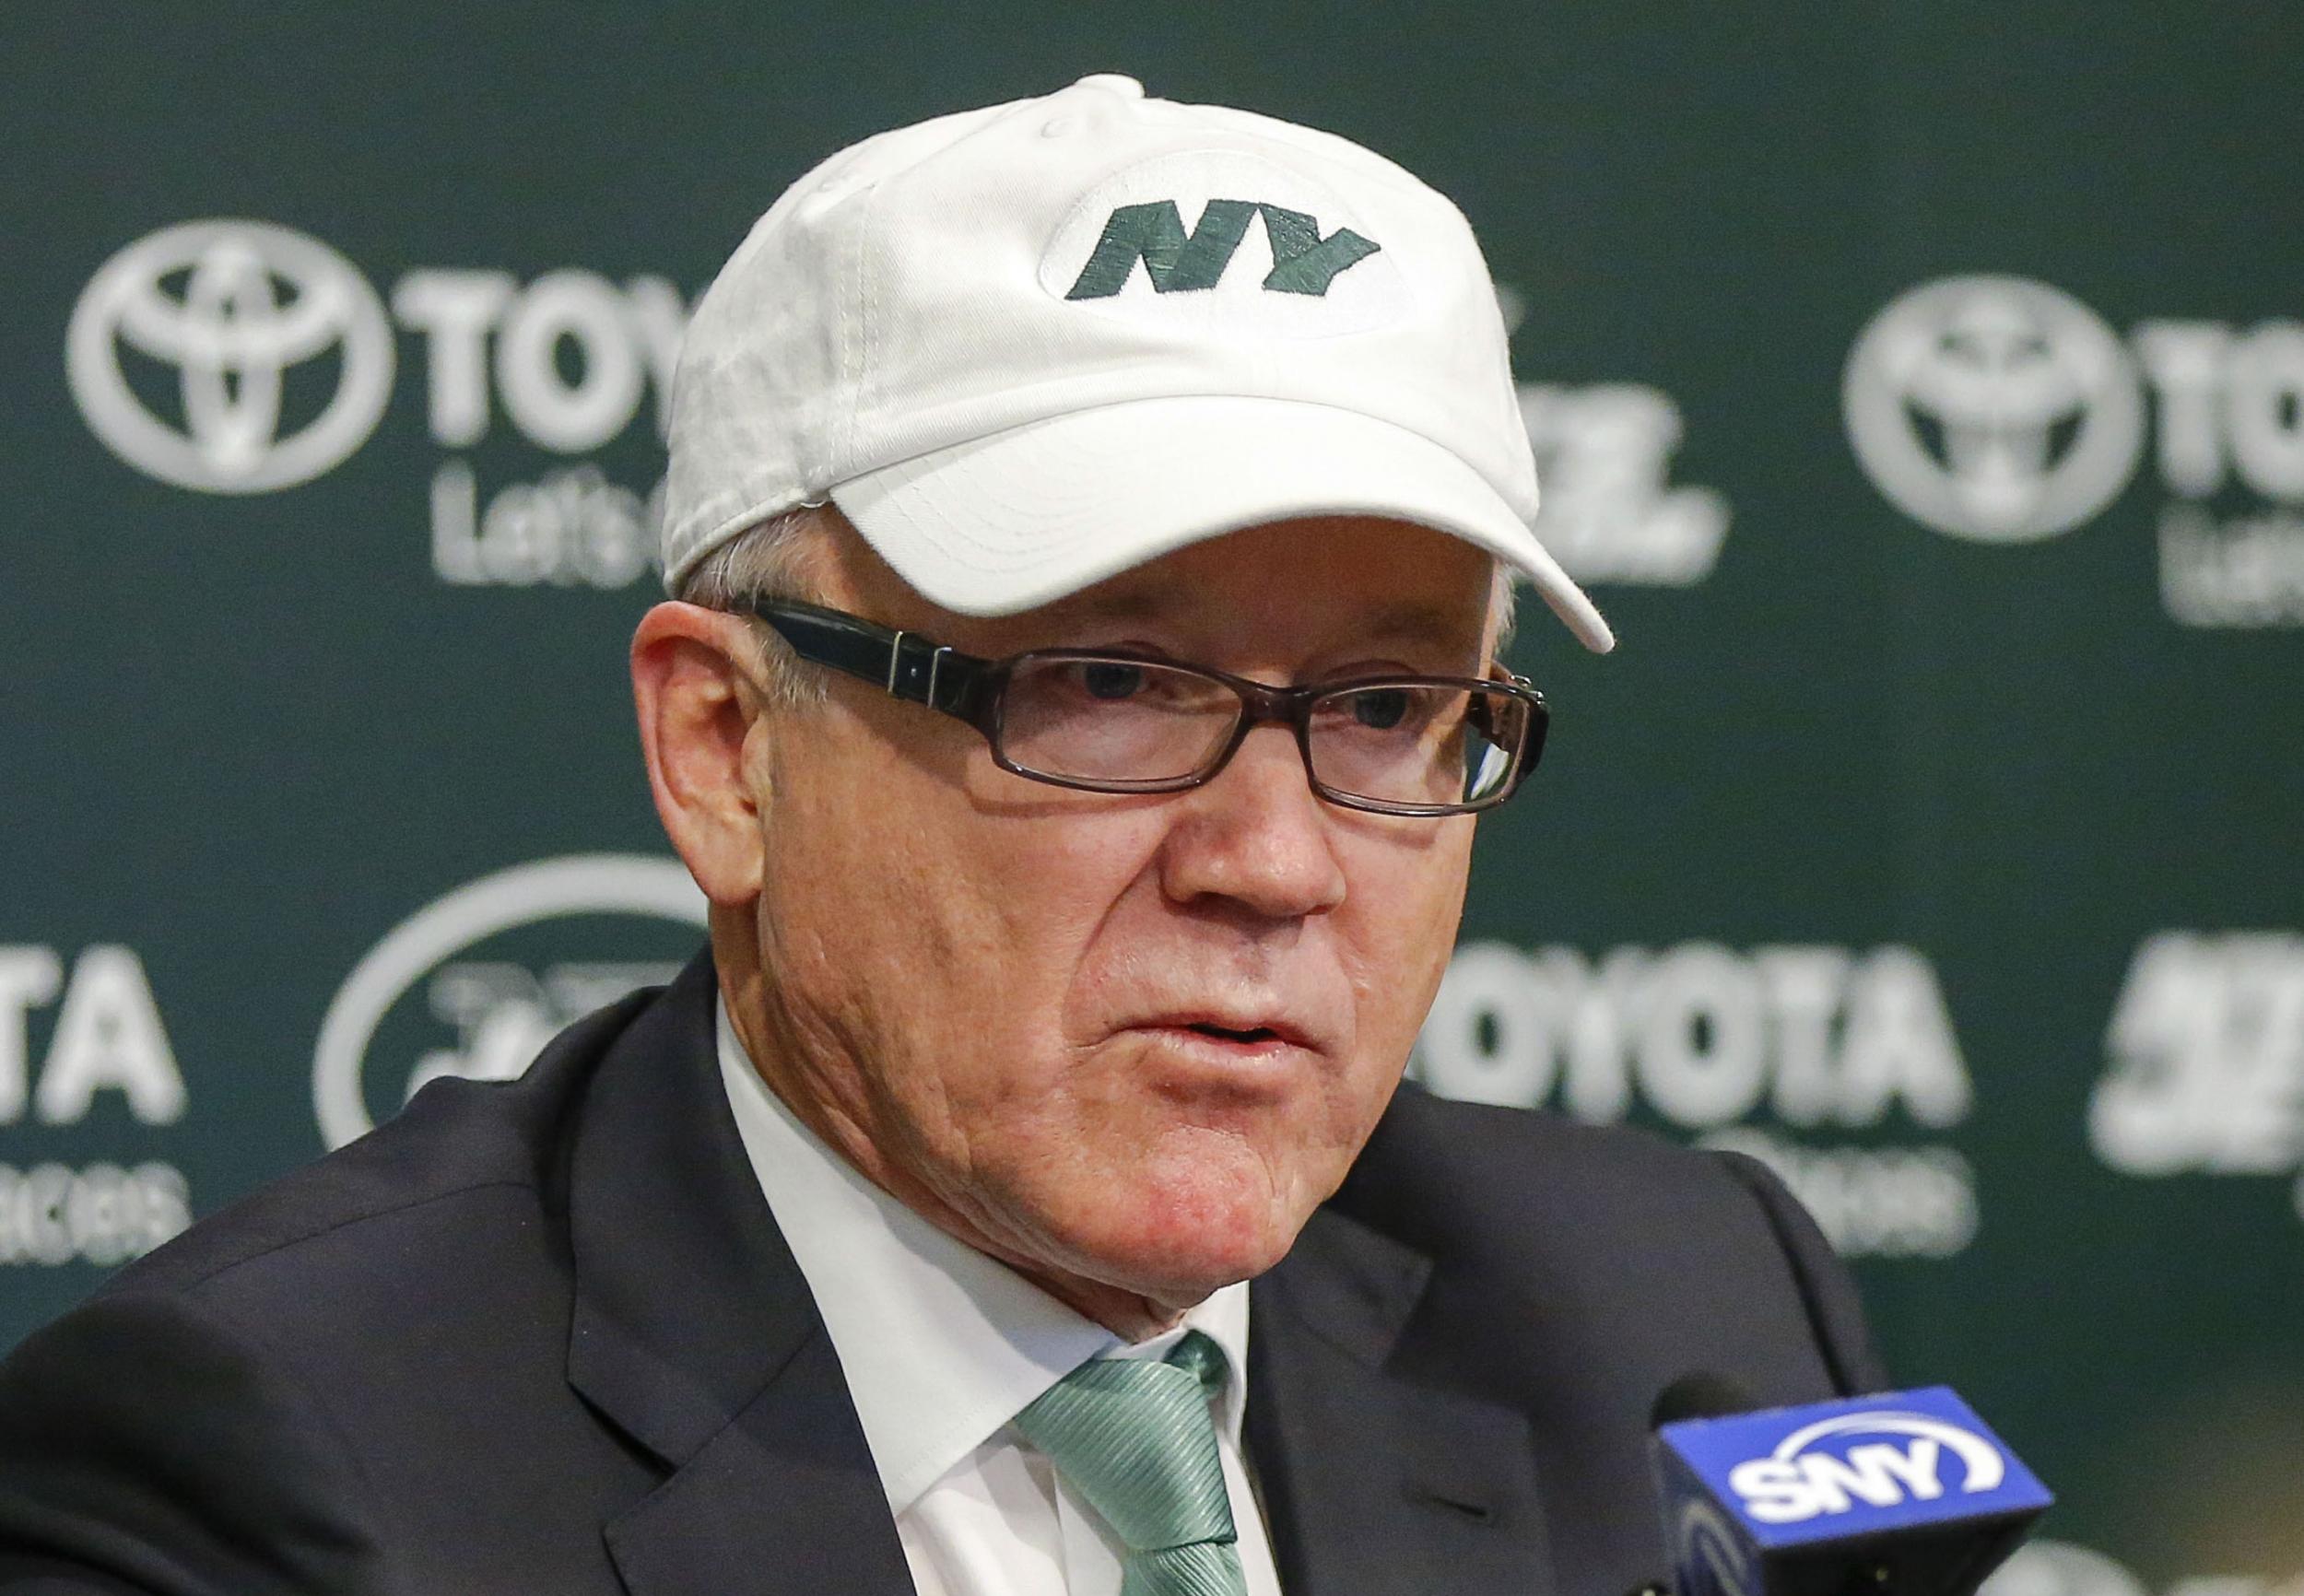 Woody Johnson, a 70-year-old billionaire, owns the New York Jets American football team